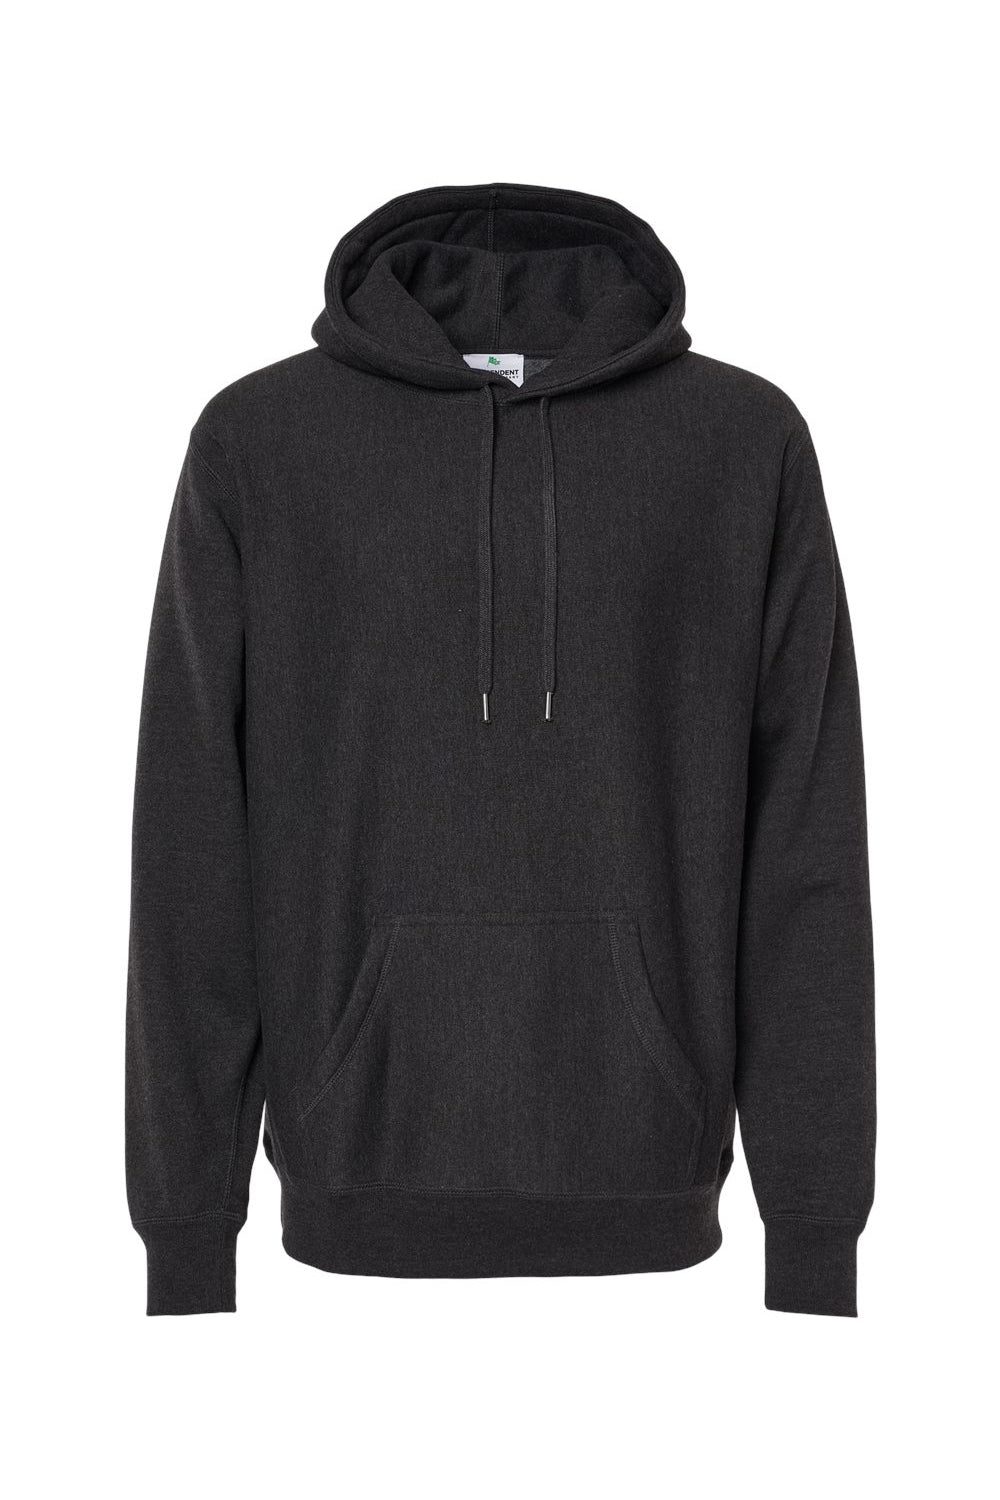 Independent Trading Co. IND5000P Mens Legend Hooded Sweatshirt Hoodie Heather Charcoal Grey Flat Front